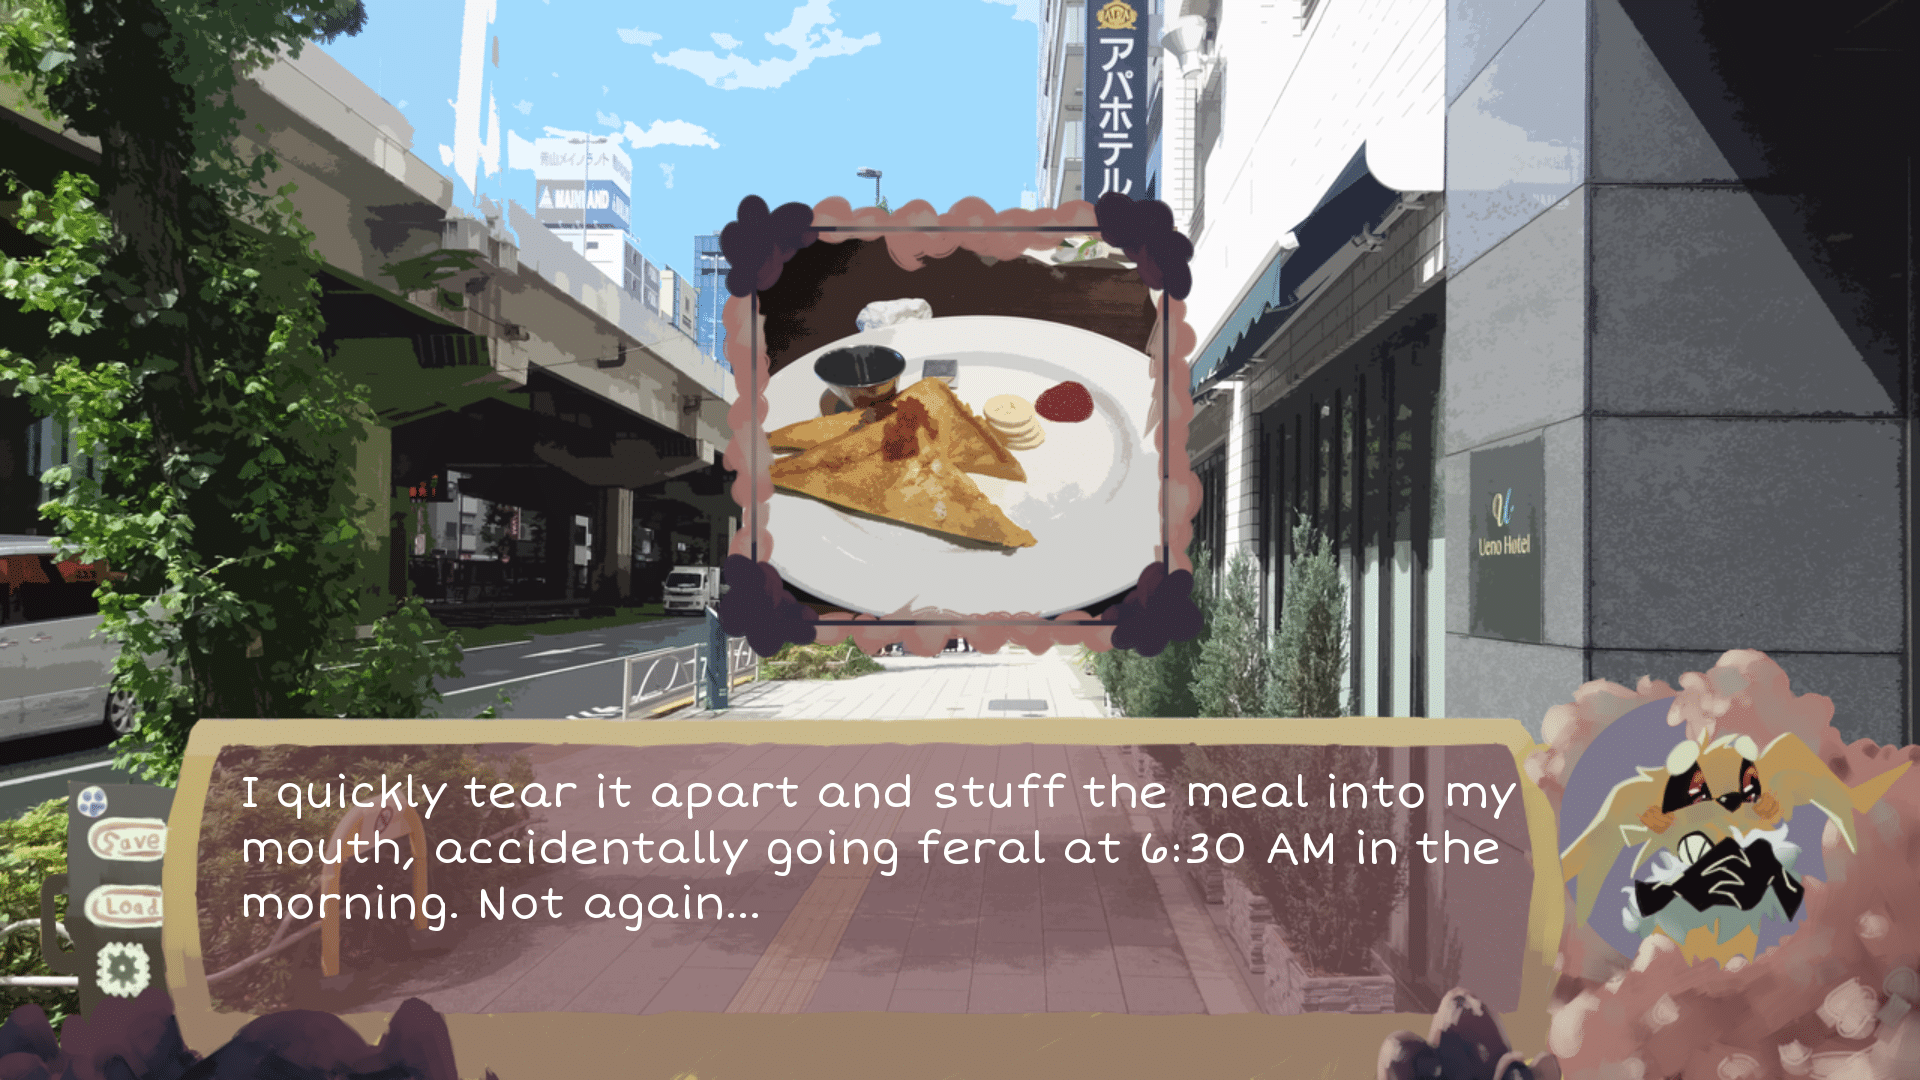 a screenshot from A Nightmare's Trip in which the main character describes going feral while eating breakfast